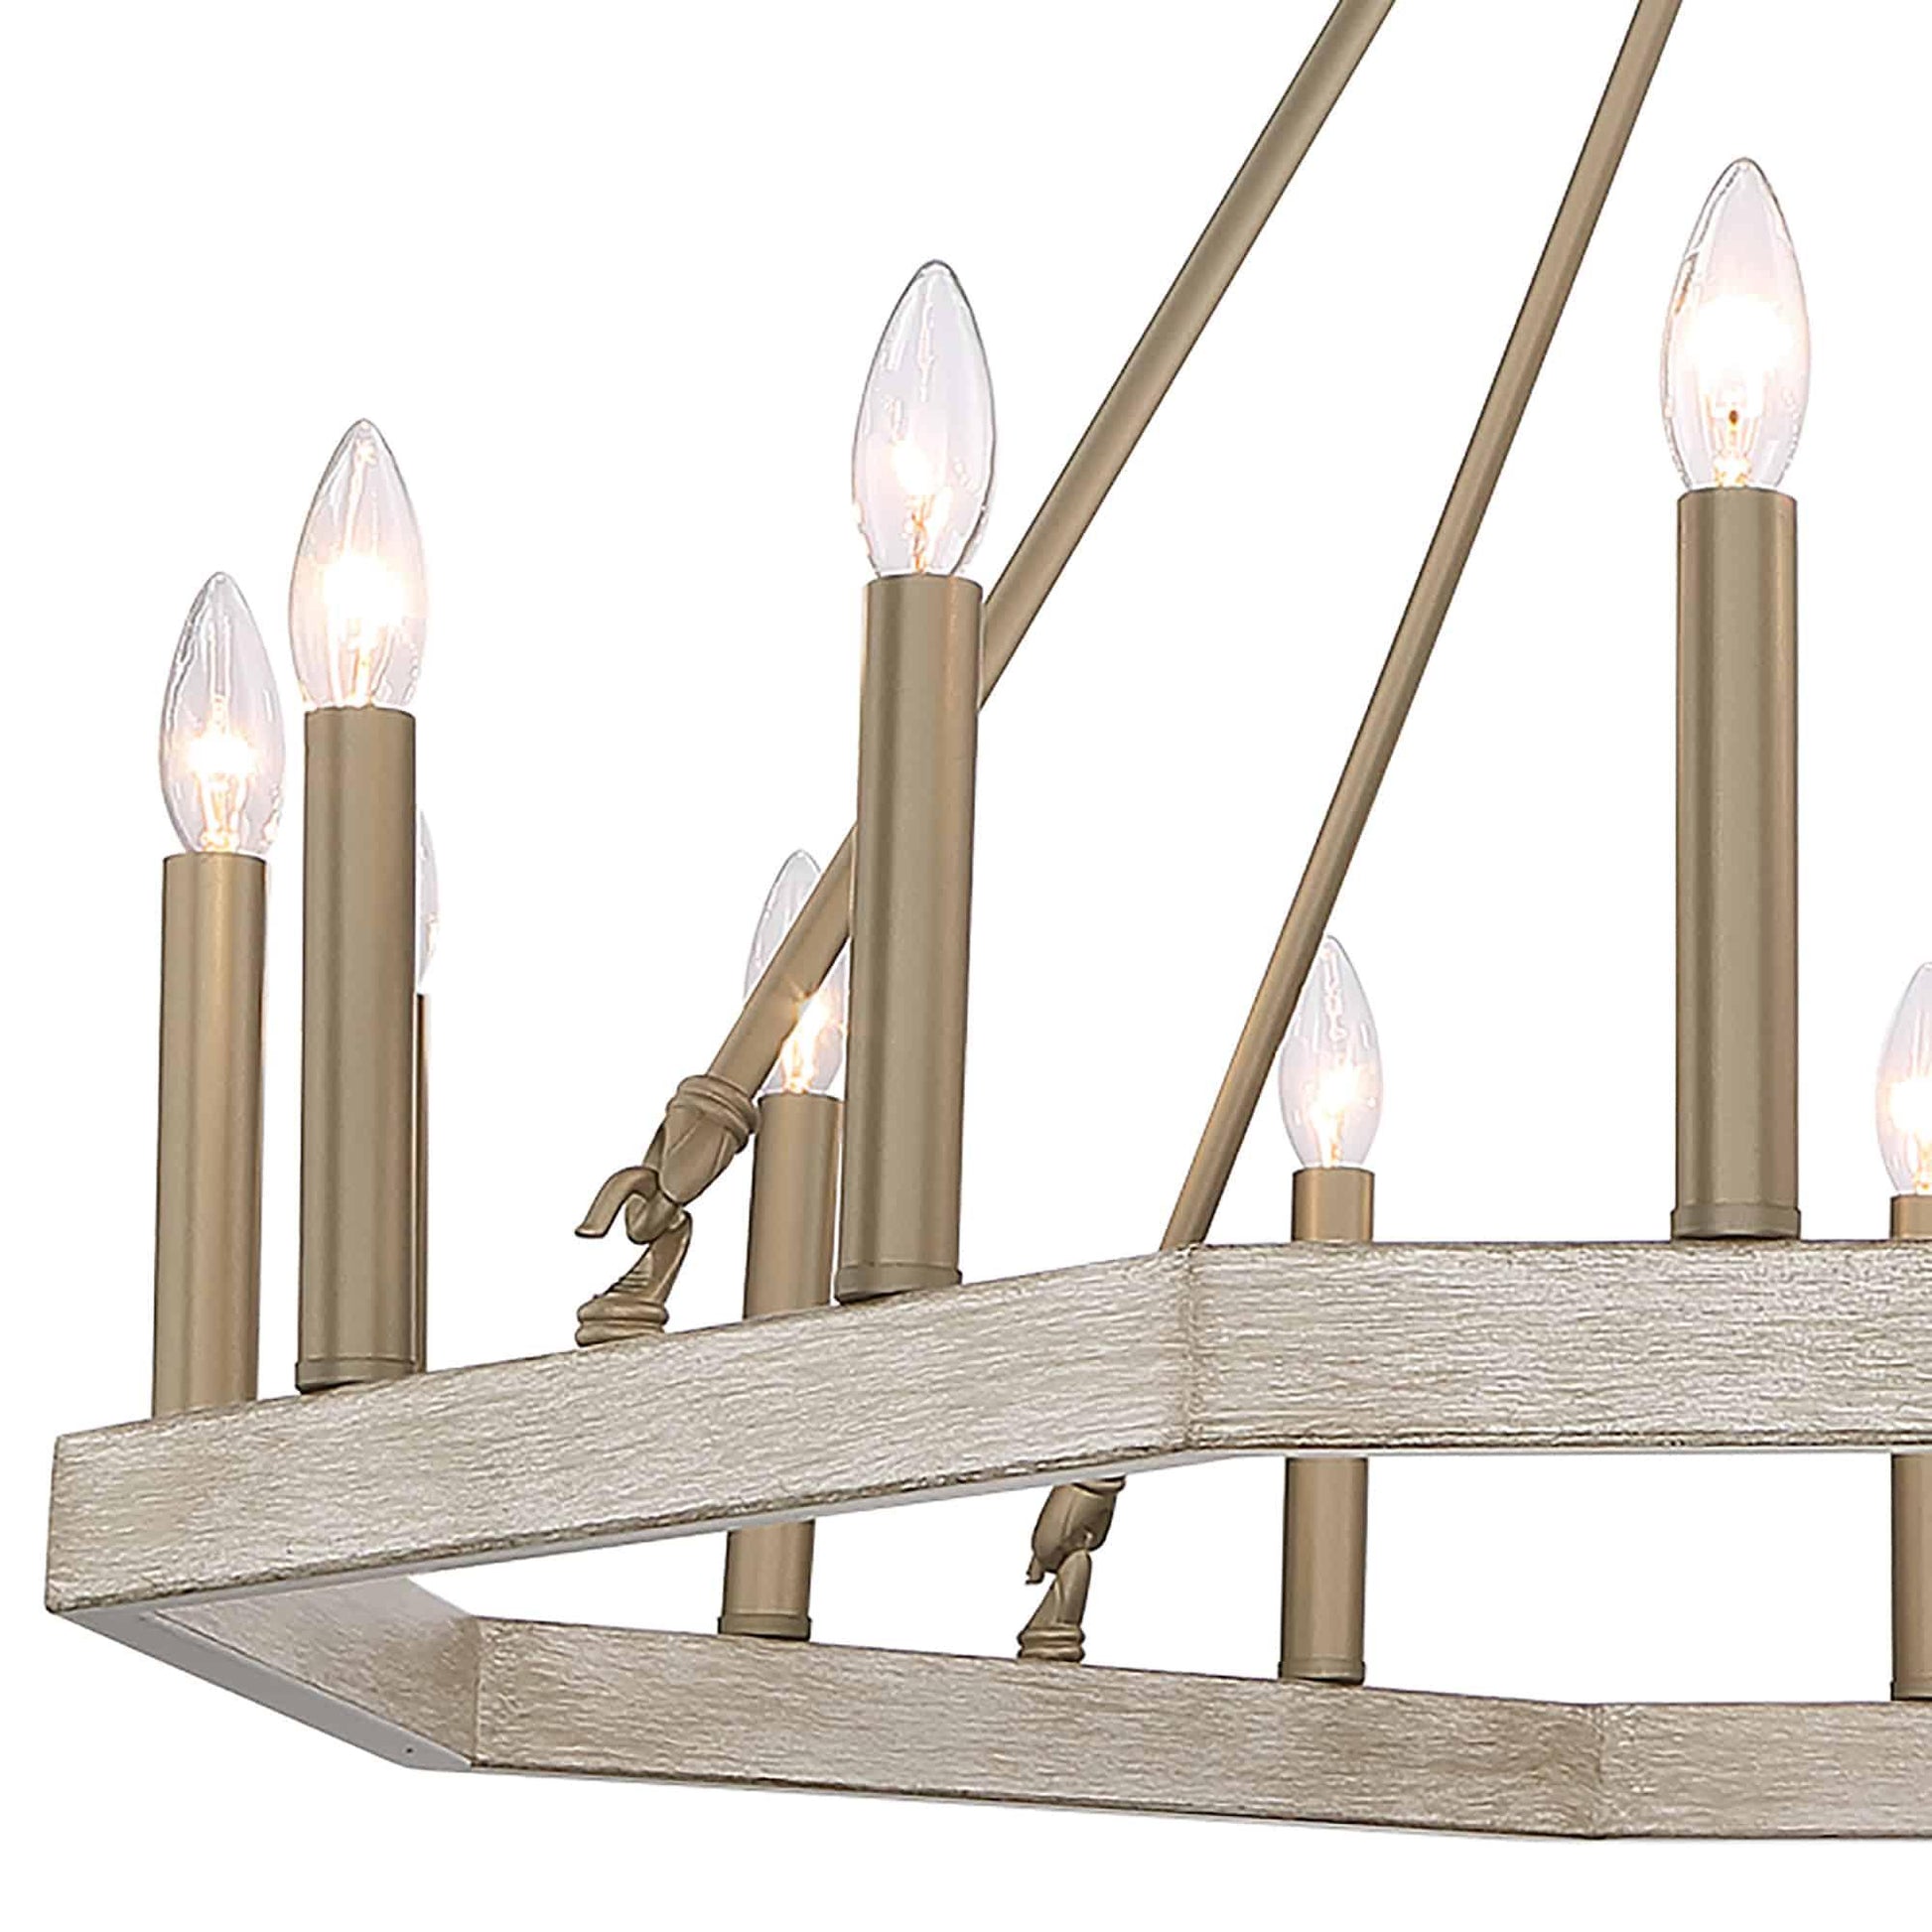 16 light candle style wagon wheel chandelier 1 (17) by ACROMA